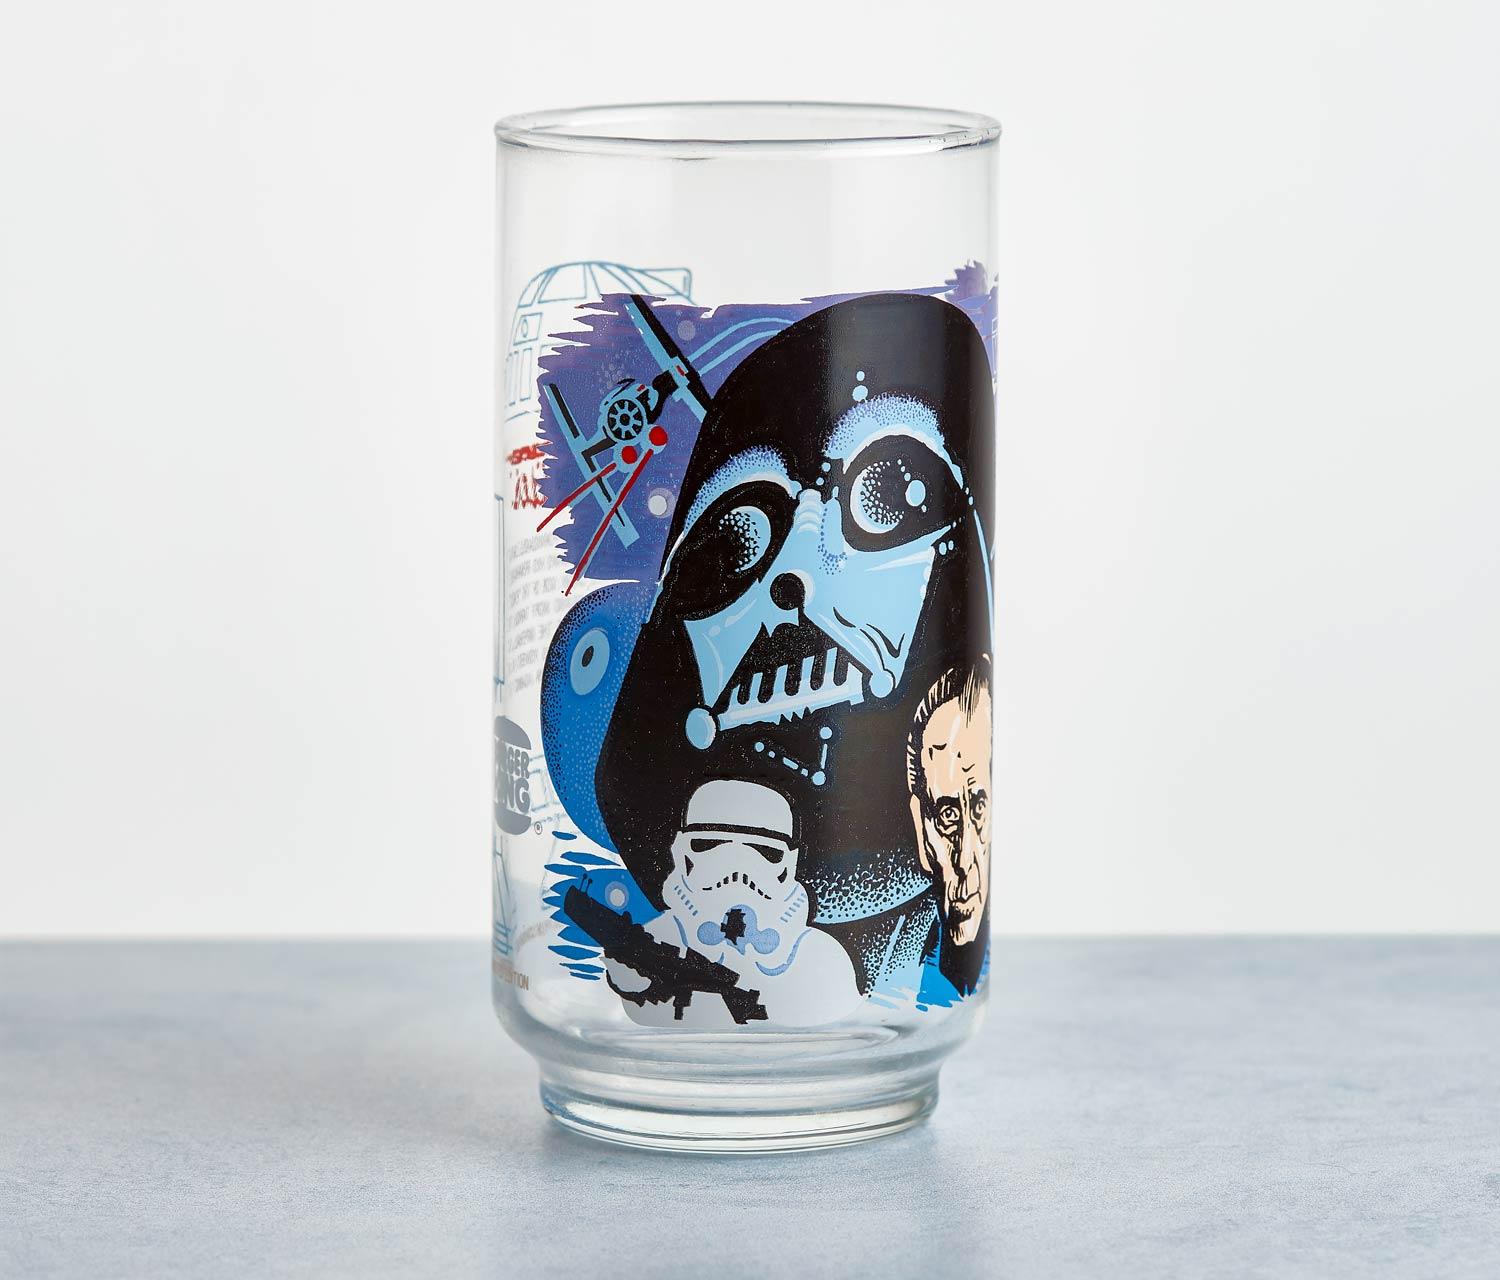 Stellar Souvenir Glasses from the Sublight Lounge on the Star Wars